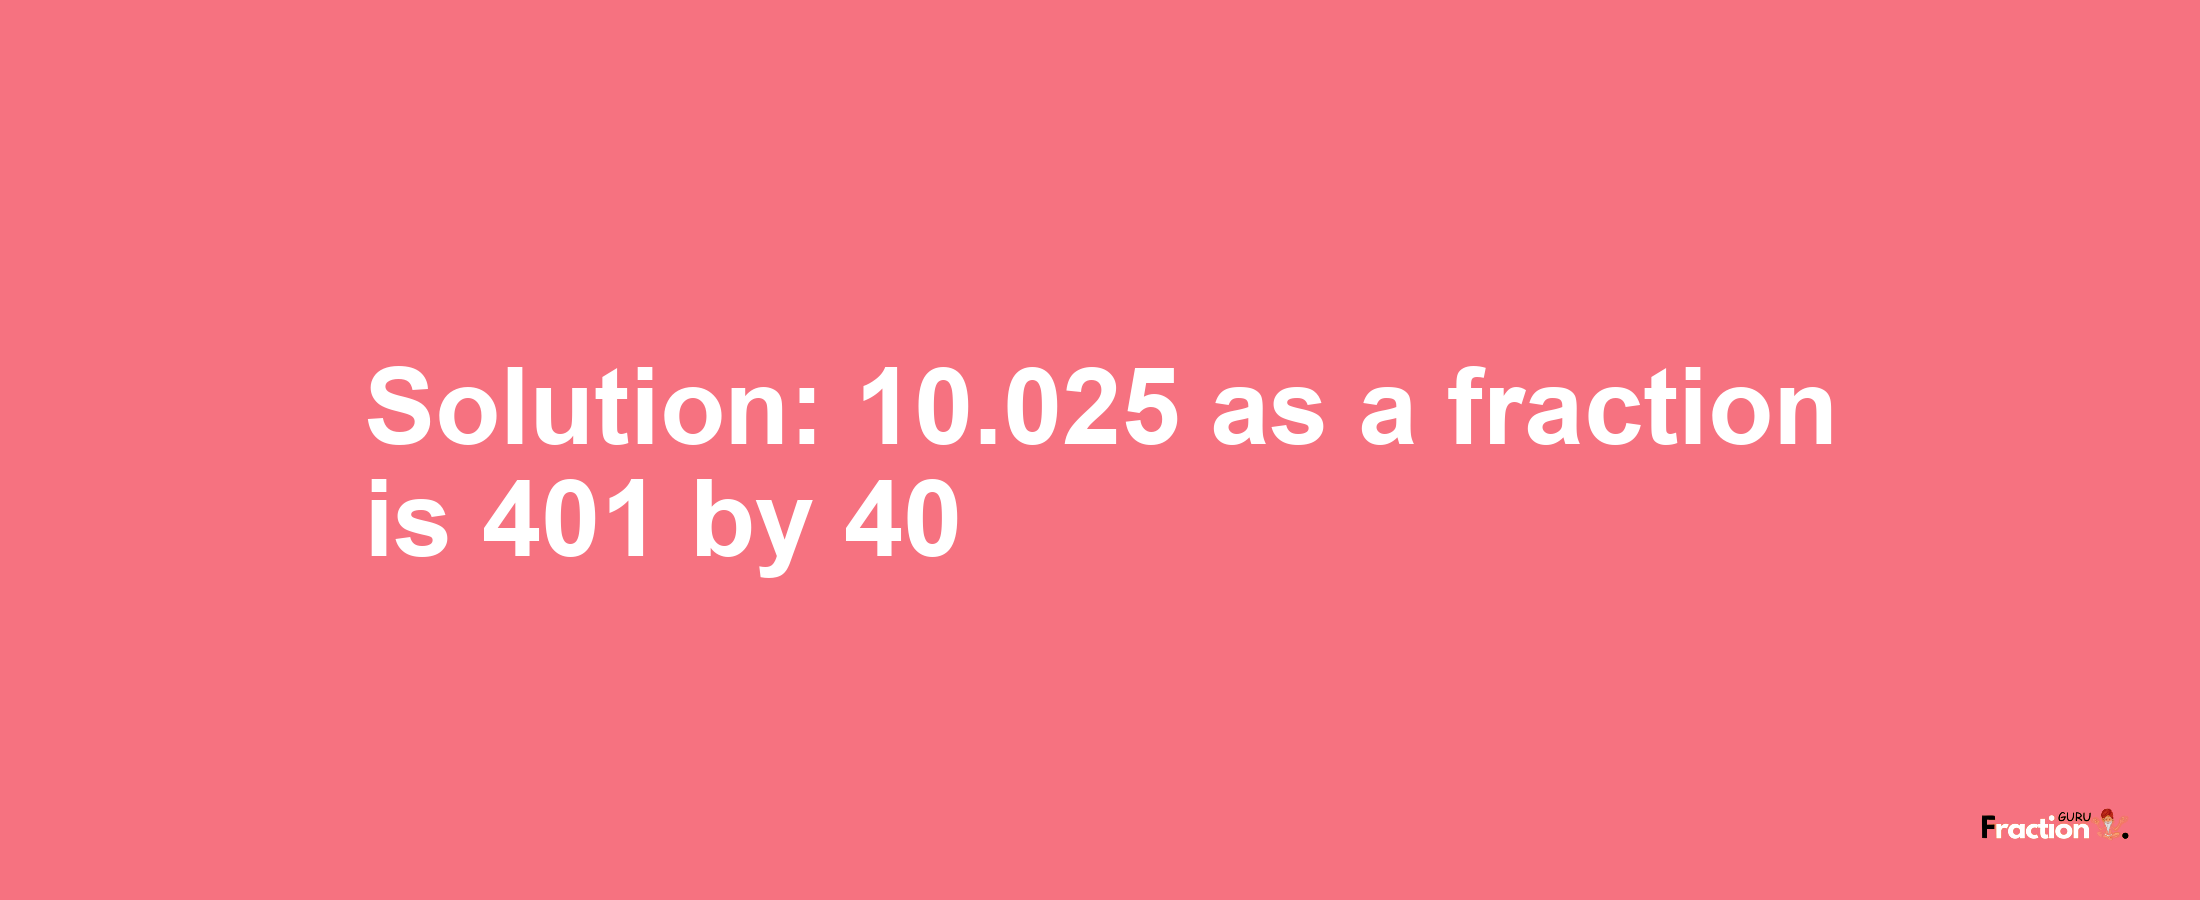 Solution:10.025 as a fraction is 401/40